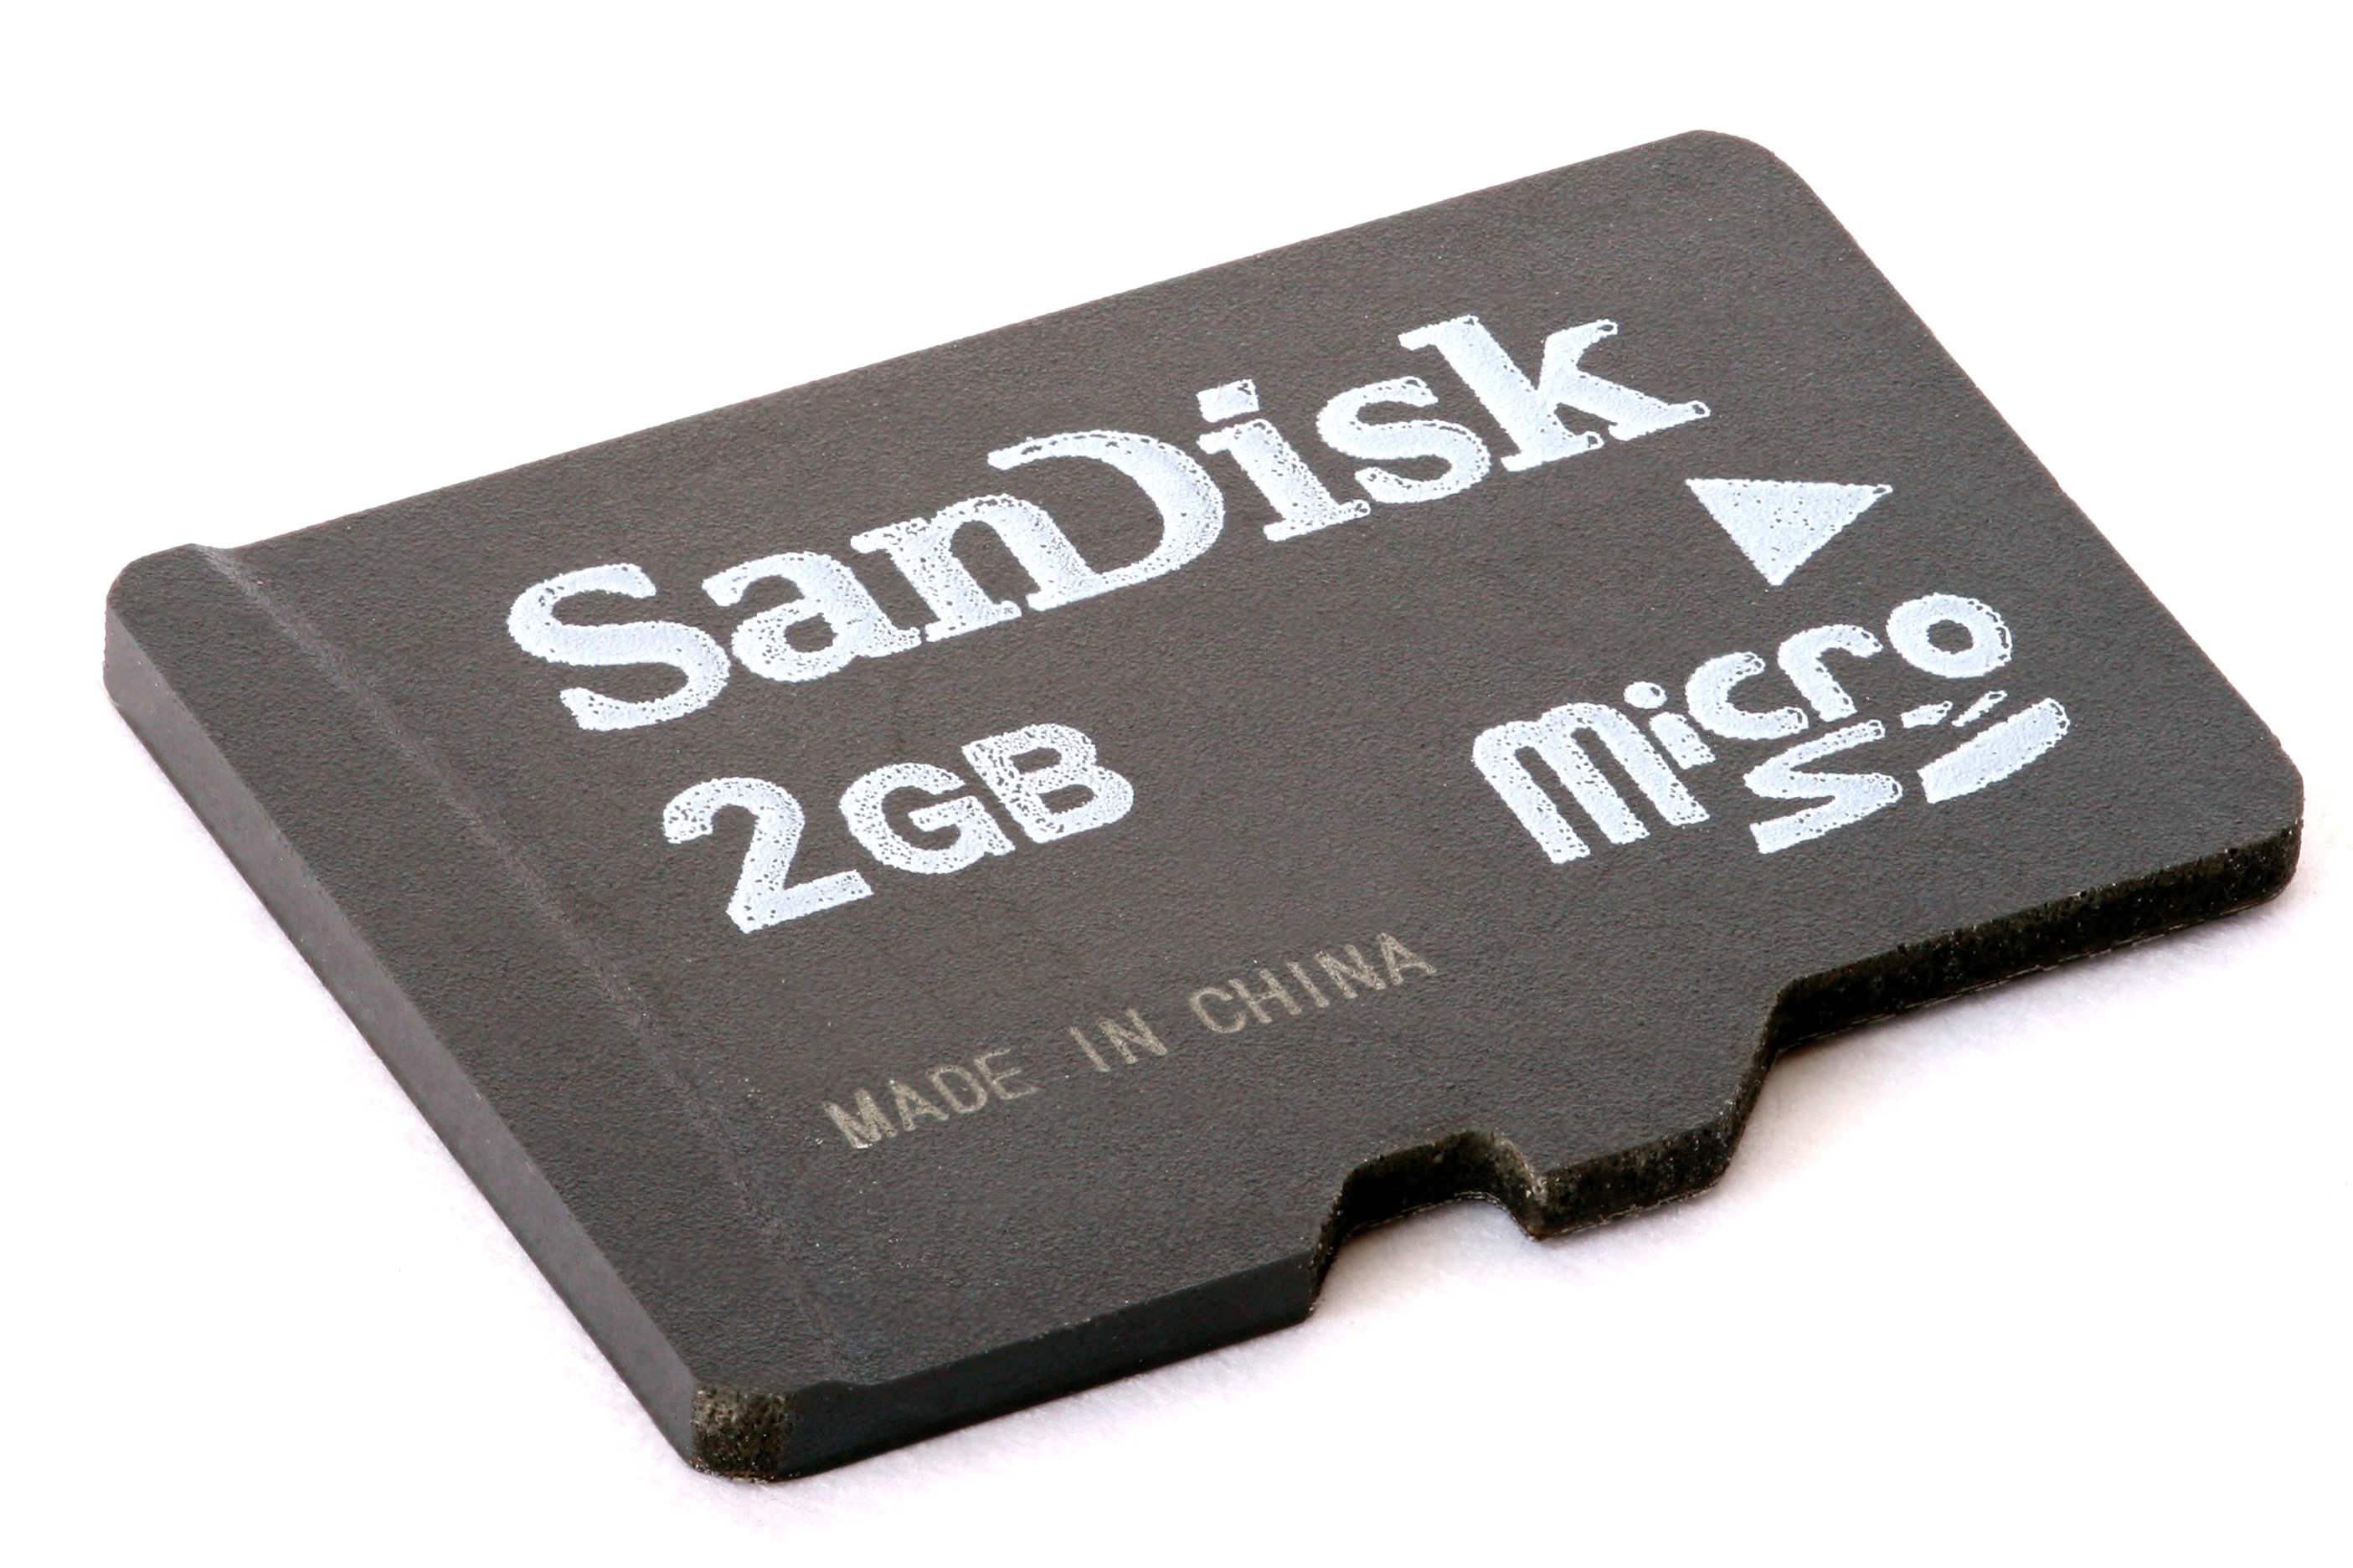 MicroSD card 2GB focus-stacked